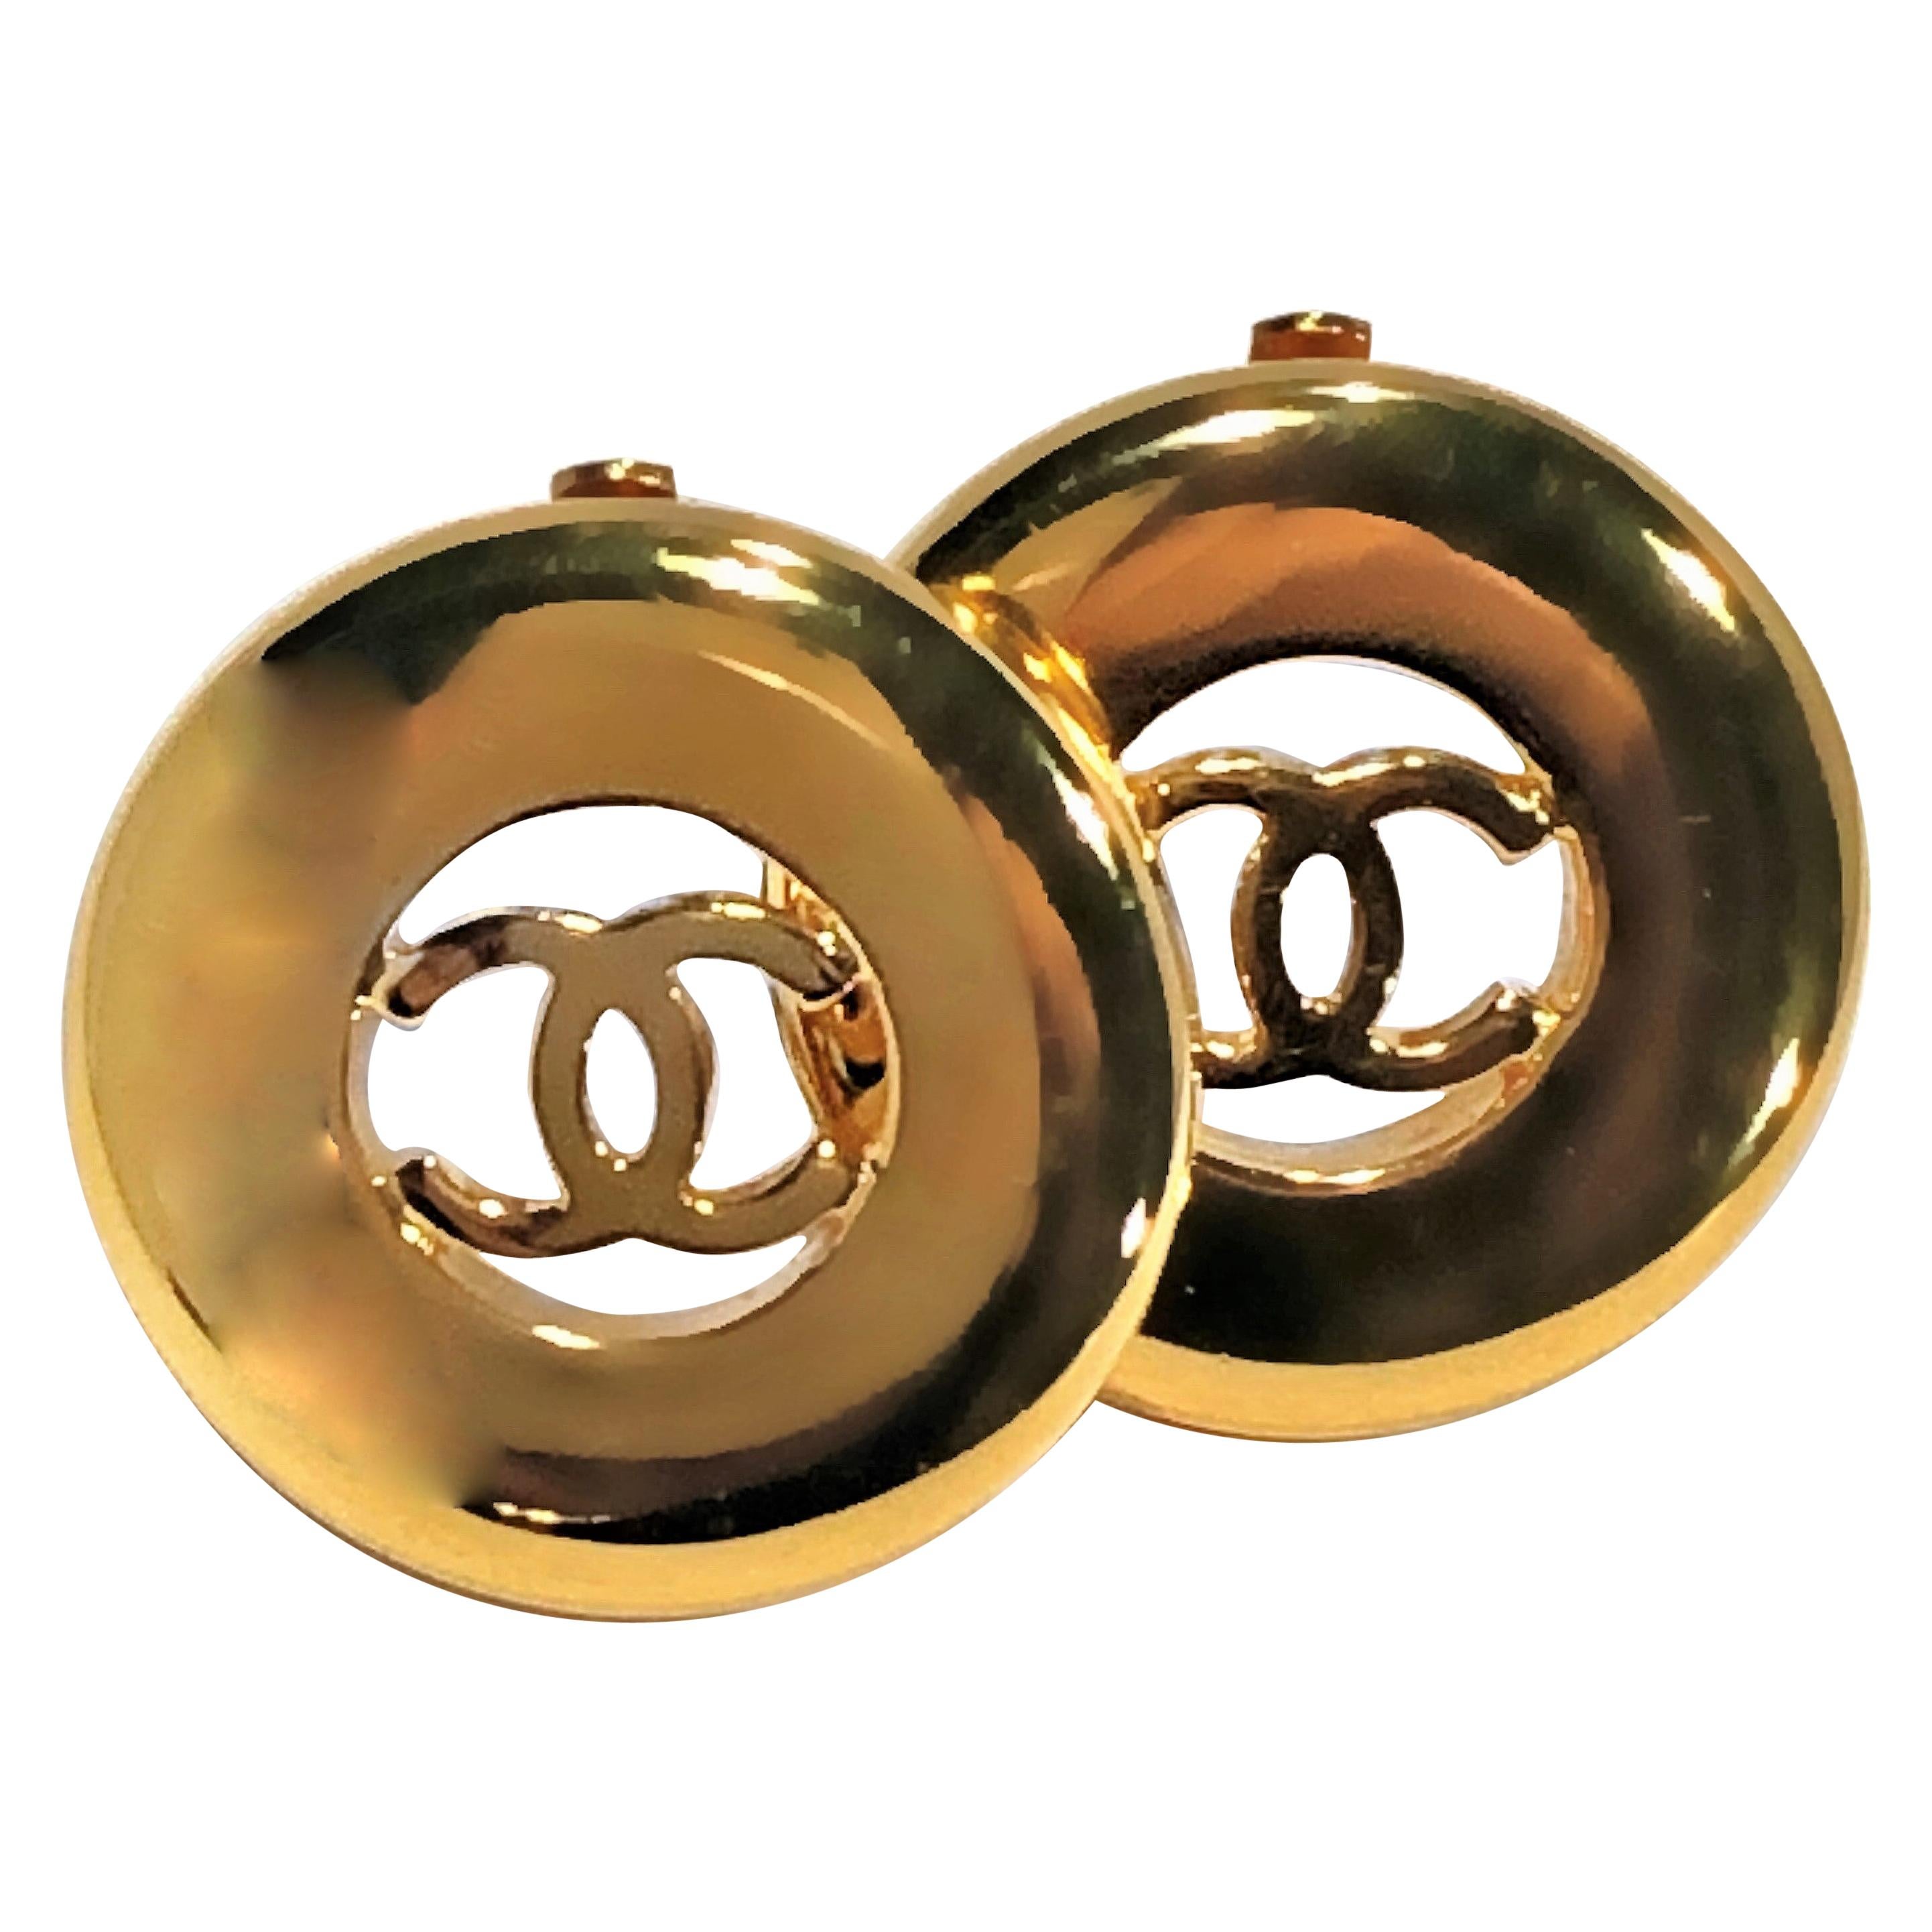 Chanel Gold Tone CC Earrings 15/16 Inch Diameter from the 1997 Spring Collection